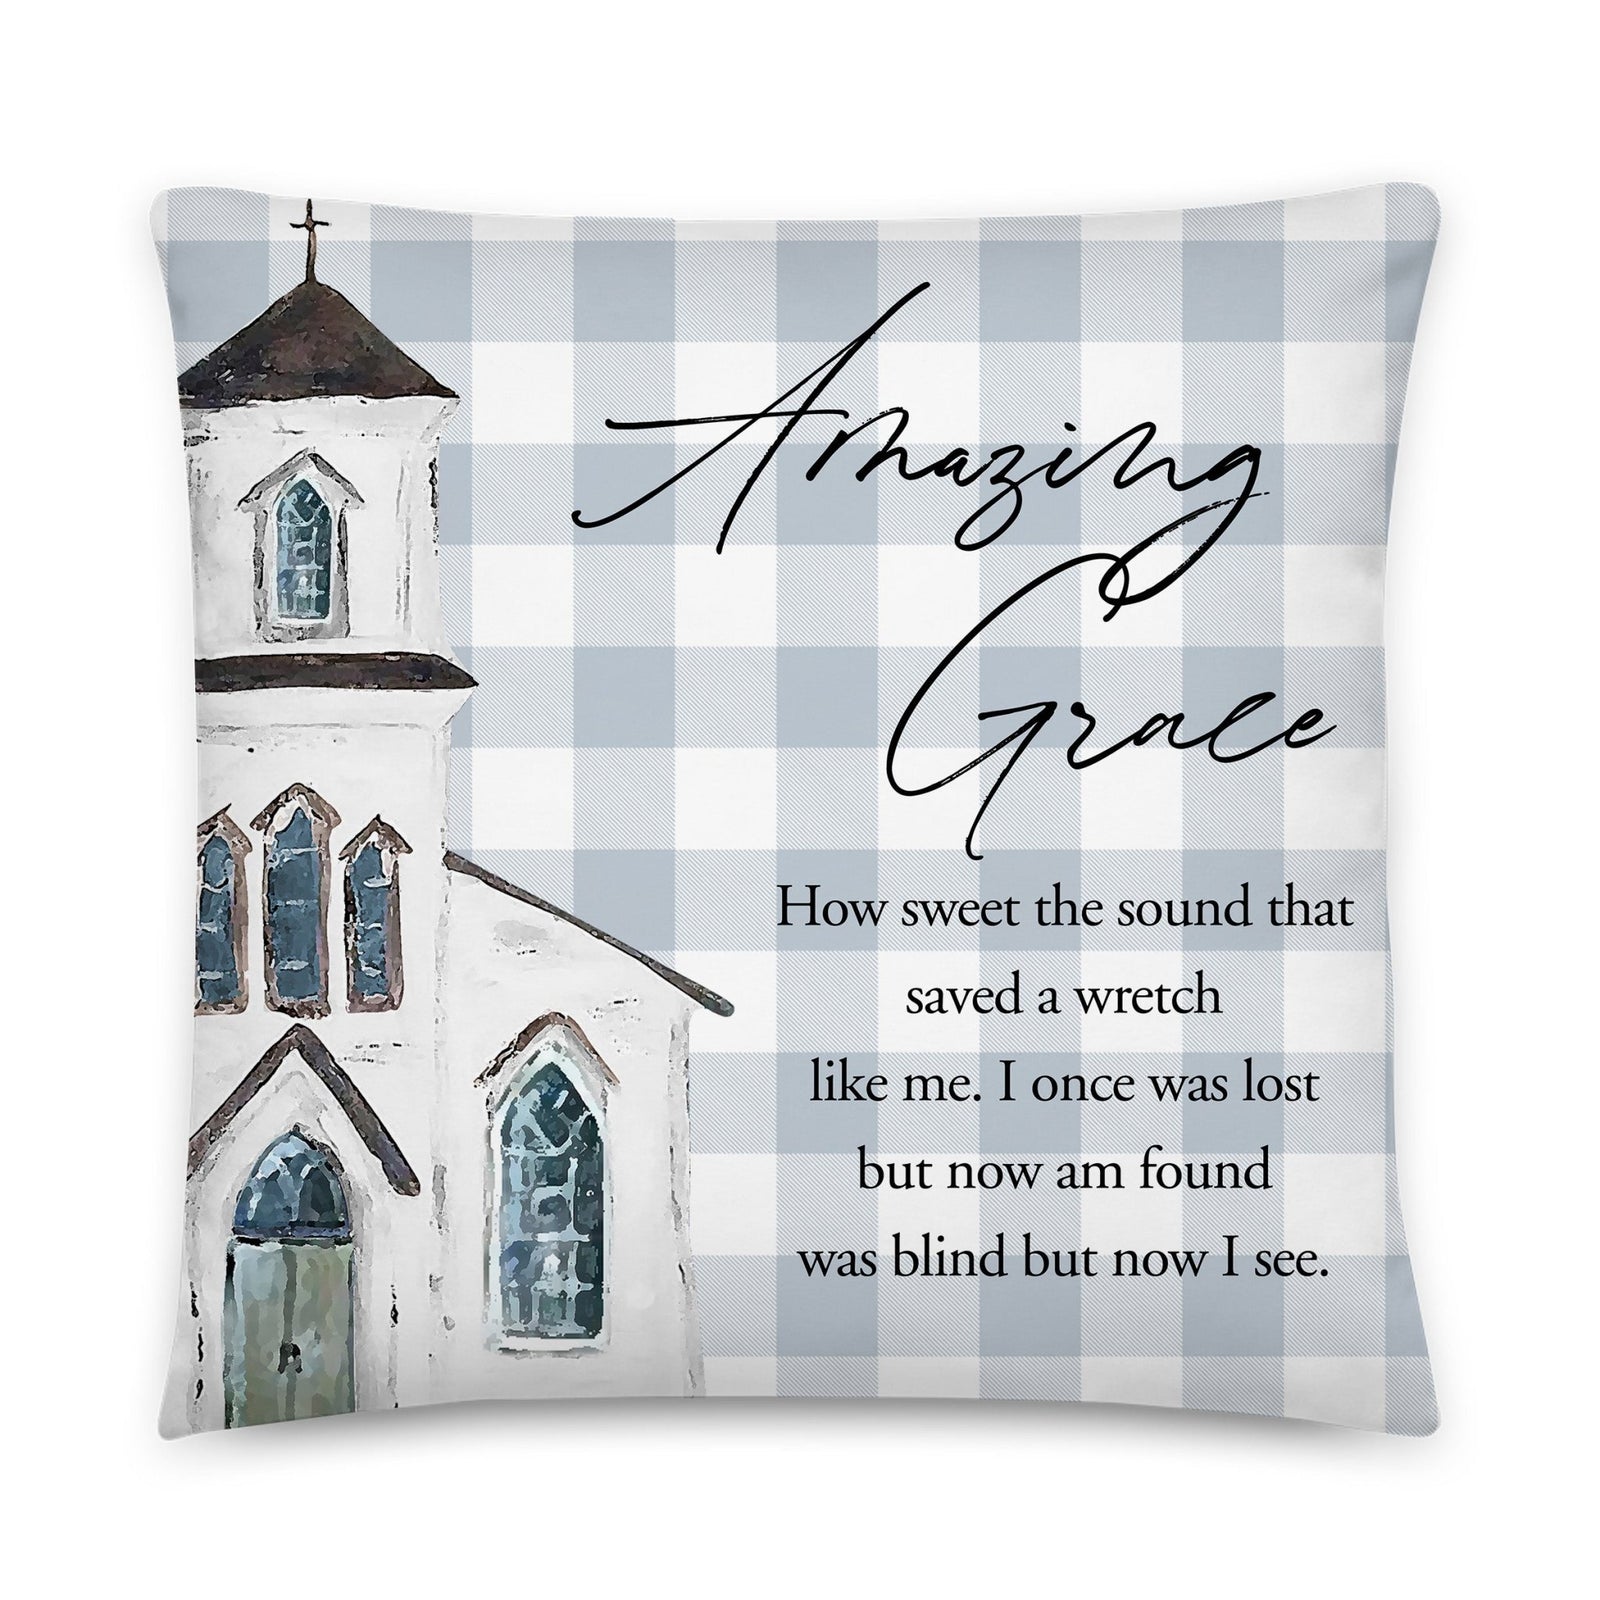 Memorial Themed Cozy Throw Pillow Bereavement Sympathy Gift For the Loss Of A Loved One - Amazing Grace - LifeSong Milestones